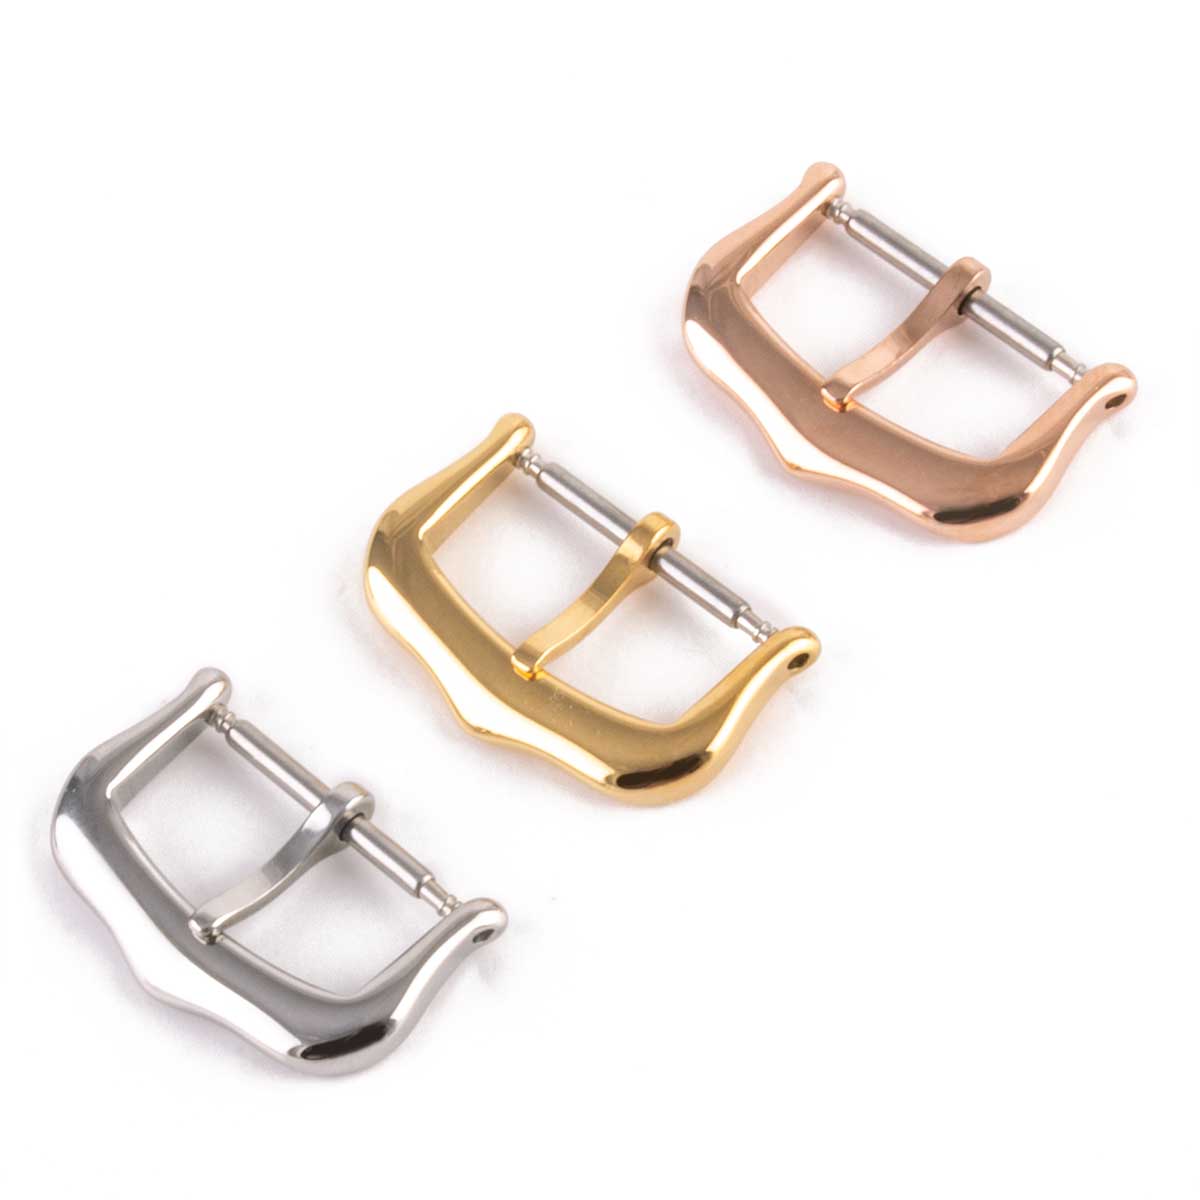 ABP tang buckle compatible with Cartier watches - 10mm, 12mm, 14mm, 16mm, 18mm